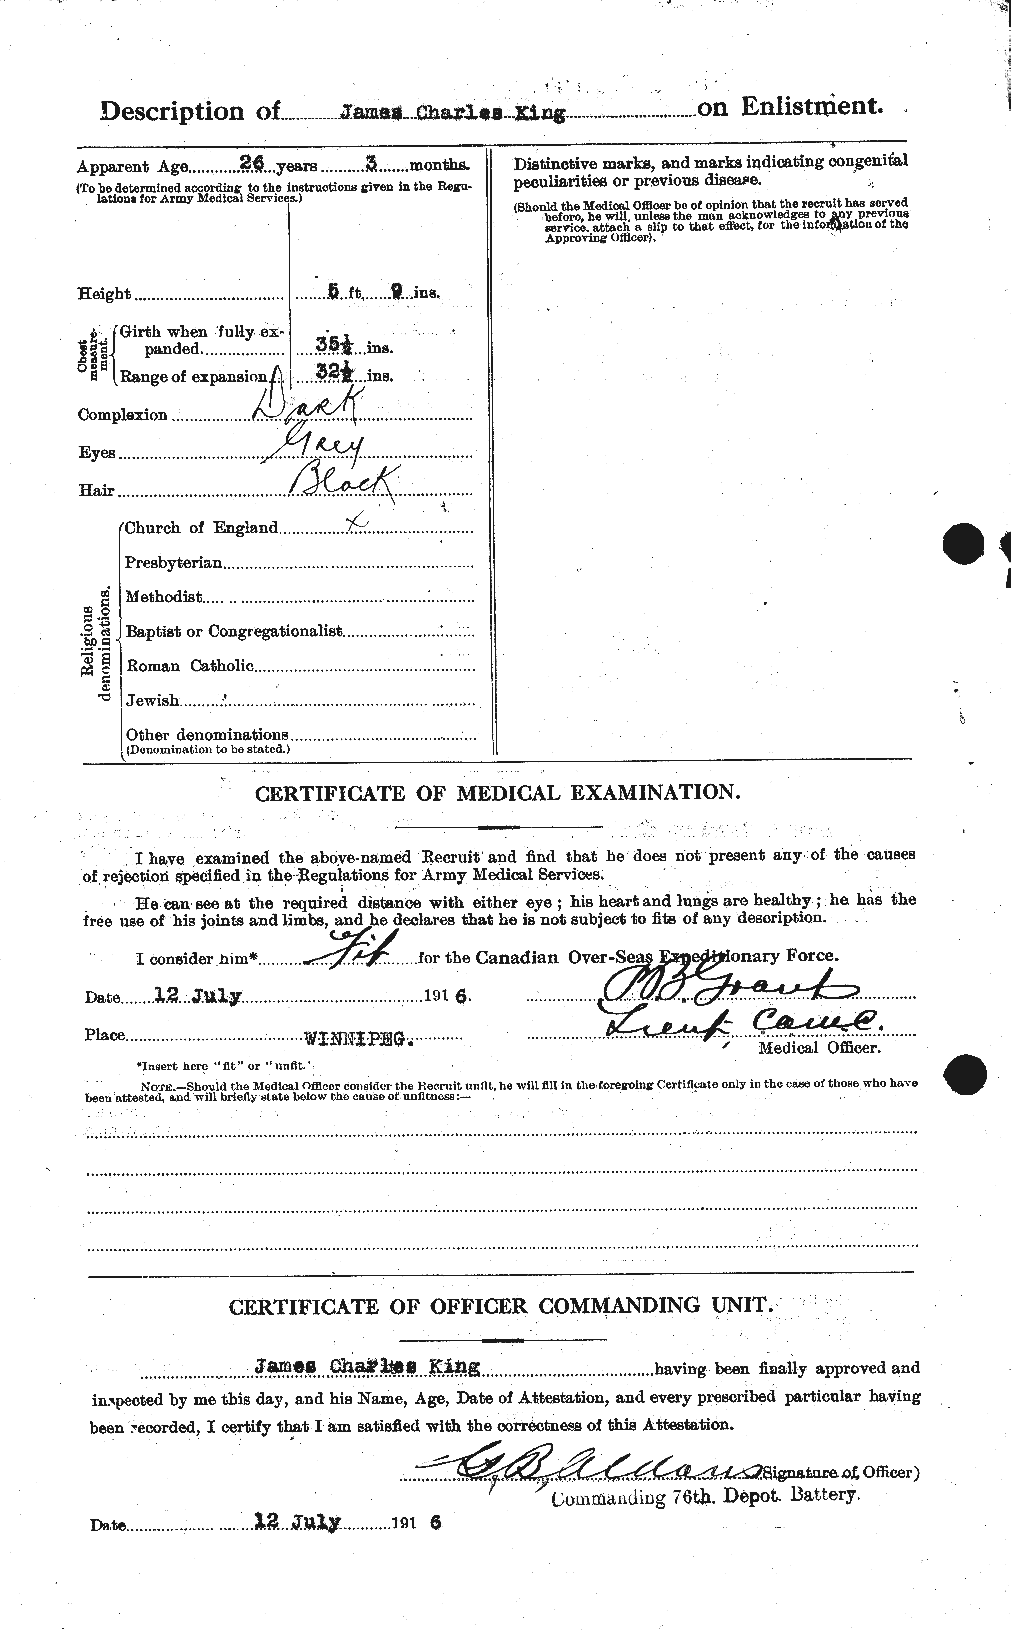 Personnel Records of the First World War - CEF 436629b